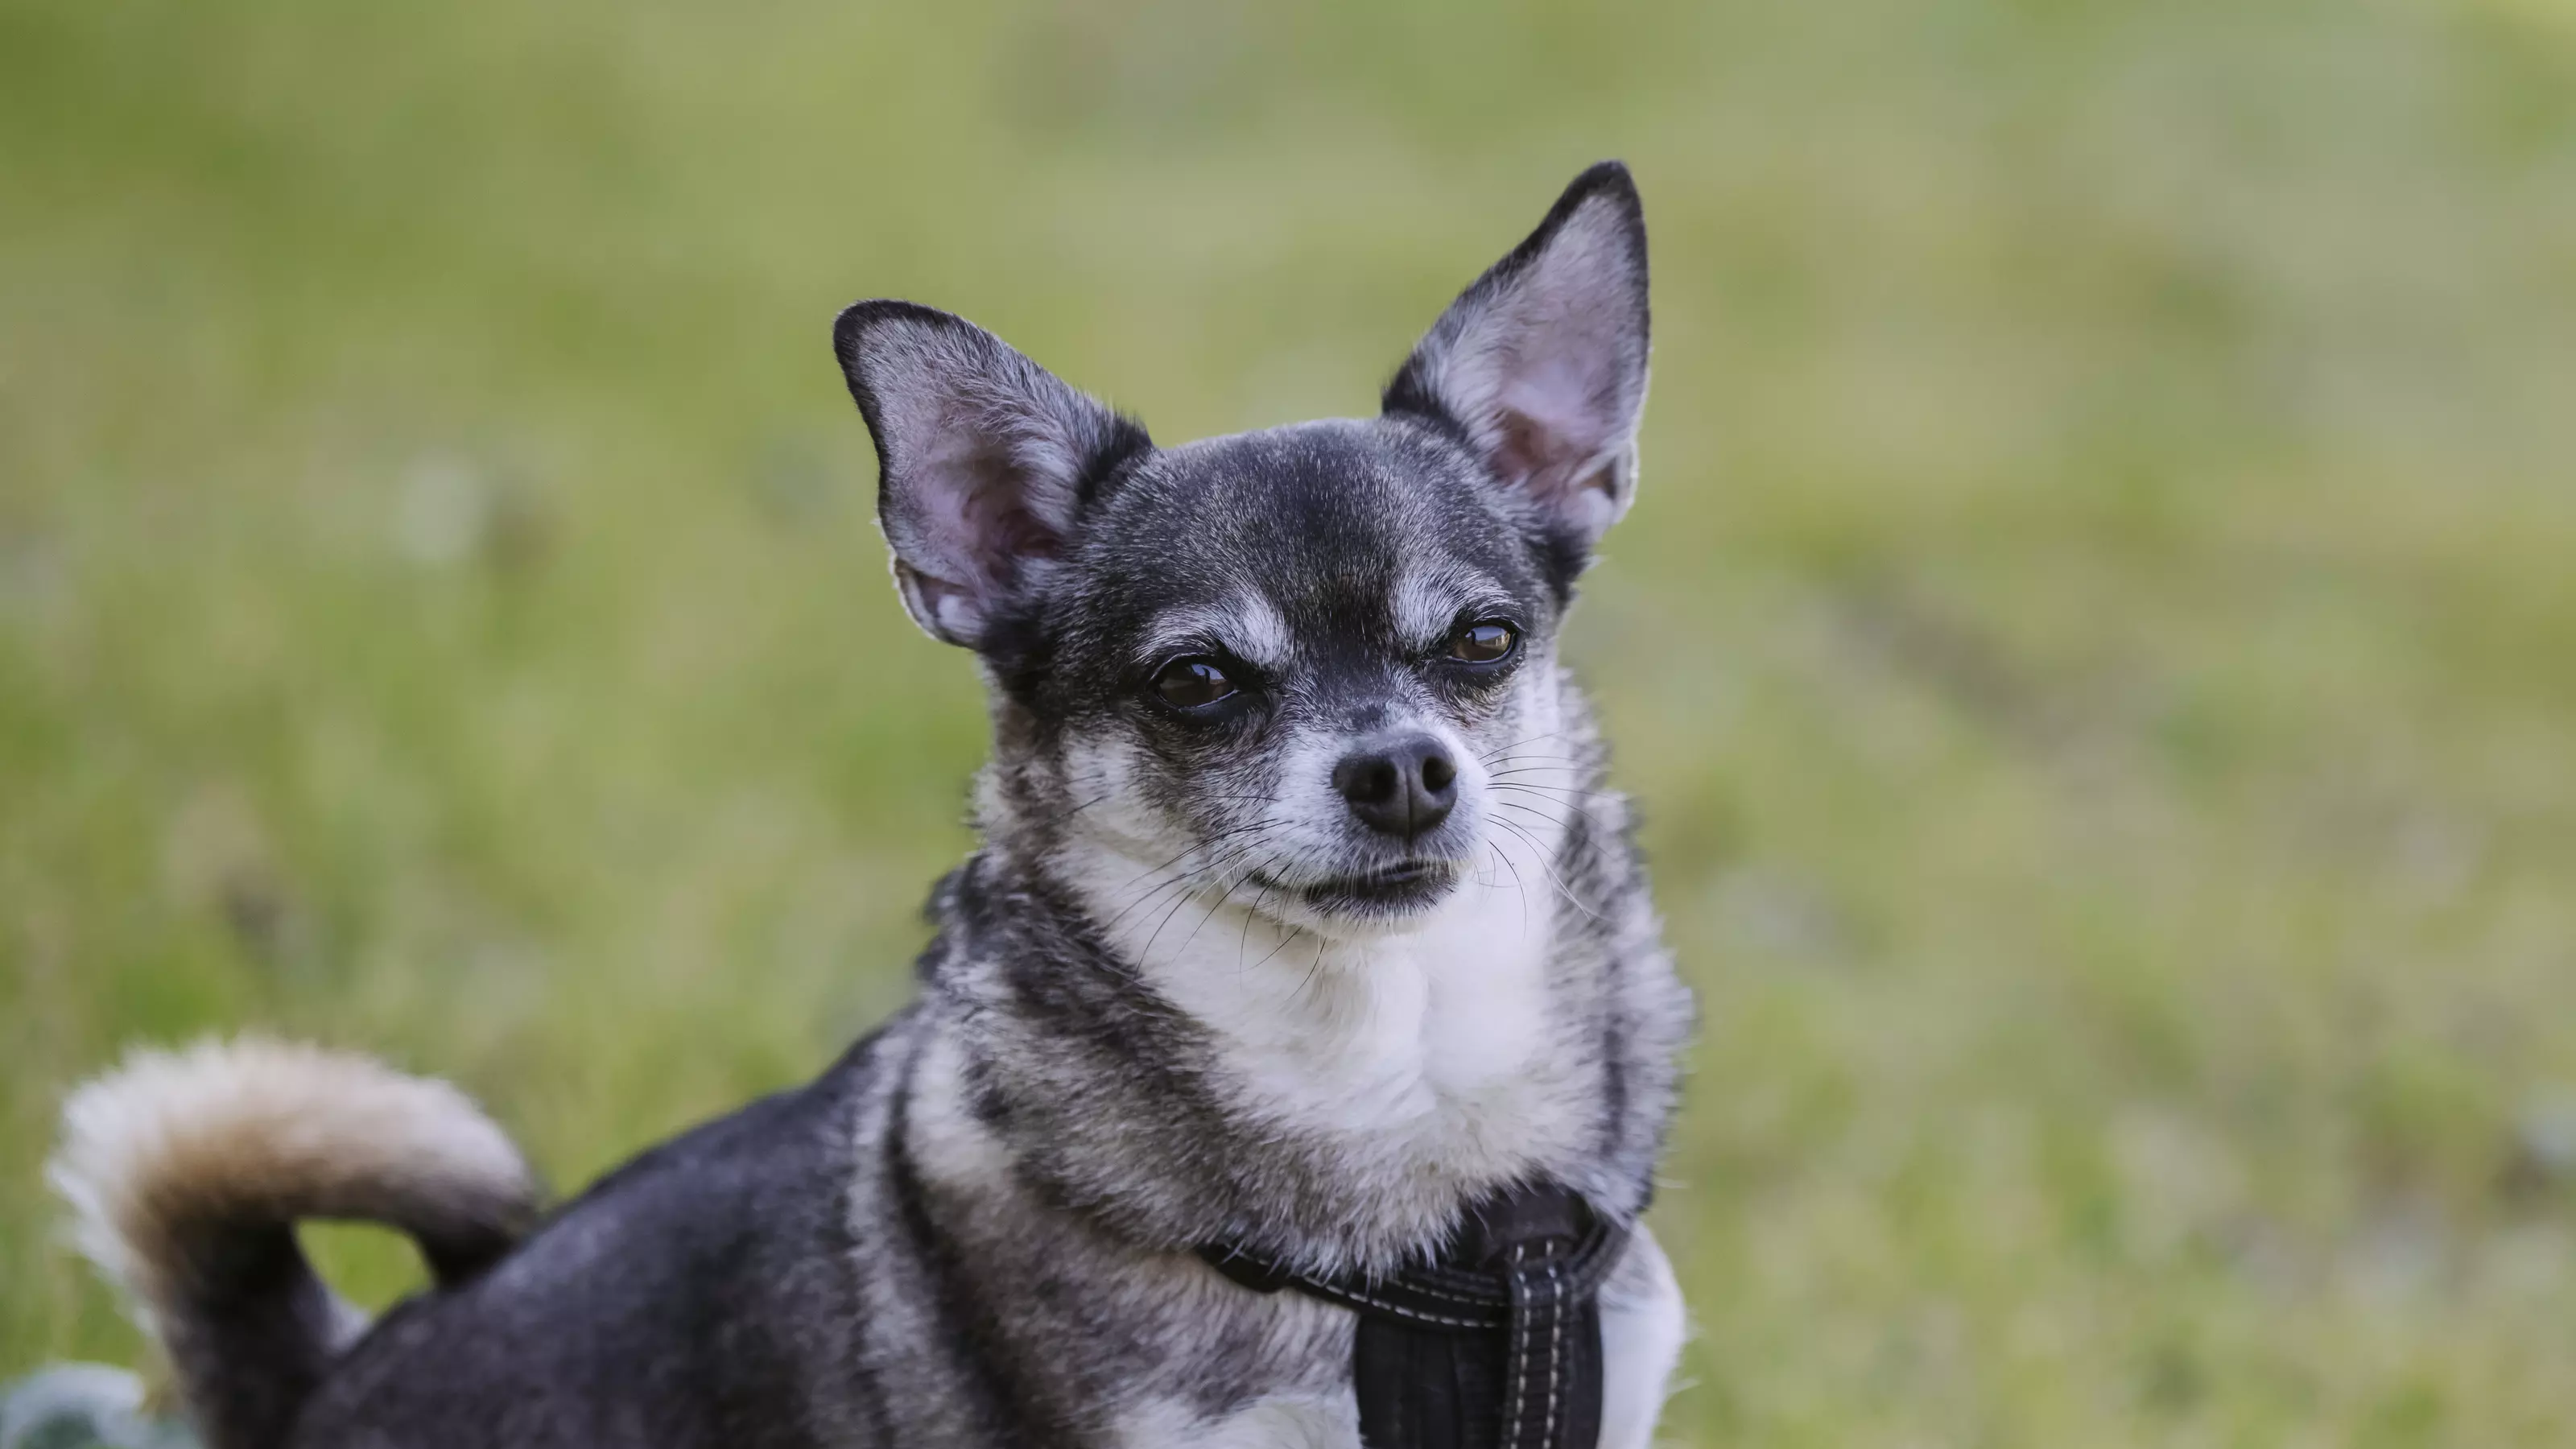 Teddy, a greying black and tan Chihuahua, sits proudly looking towards the camera